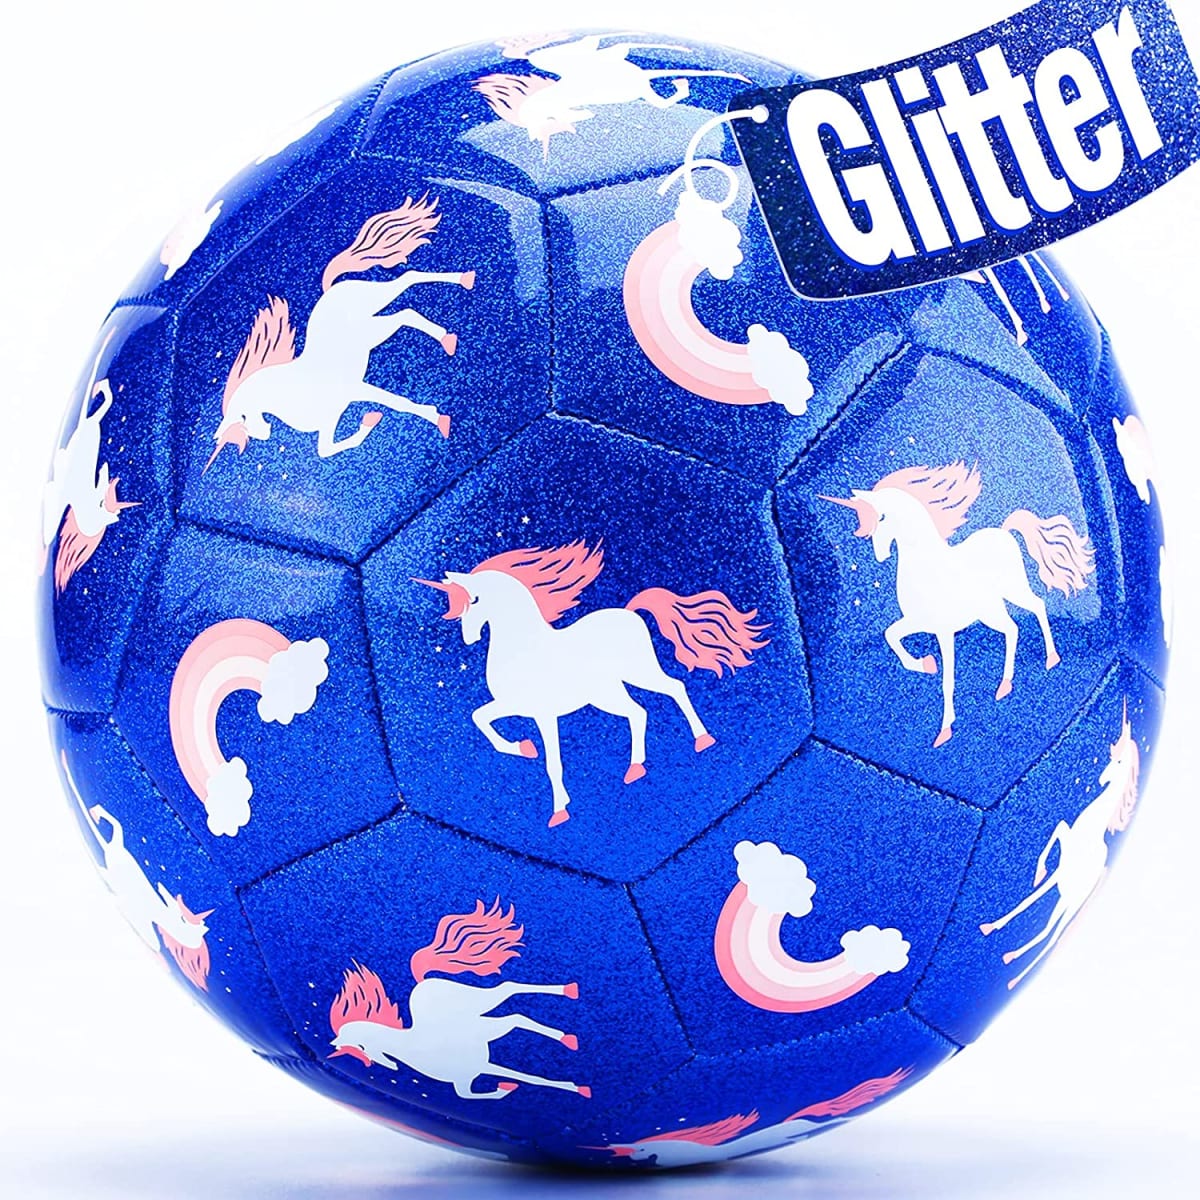 Soccer Ball Size 3 Soccer Ball Glitter Unicorn Gifts for Girls Boys, Kids Toddler Soccer Balls Kids Outdoor for Ages 4-8 Toddlers Age 3-4,